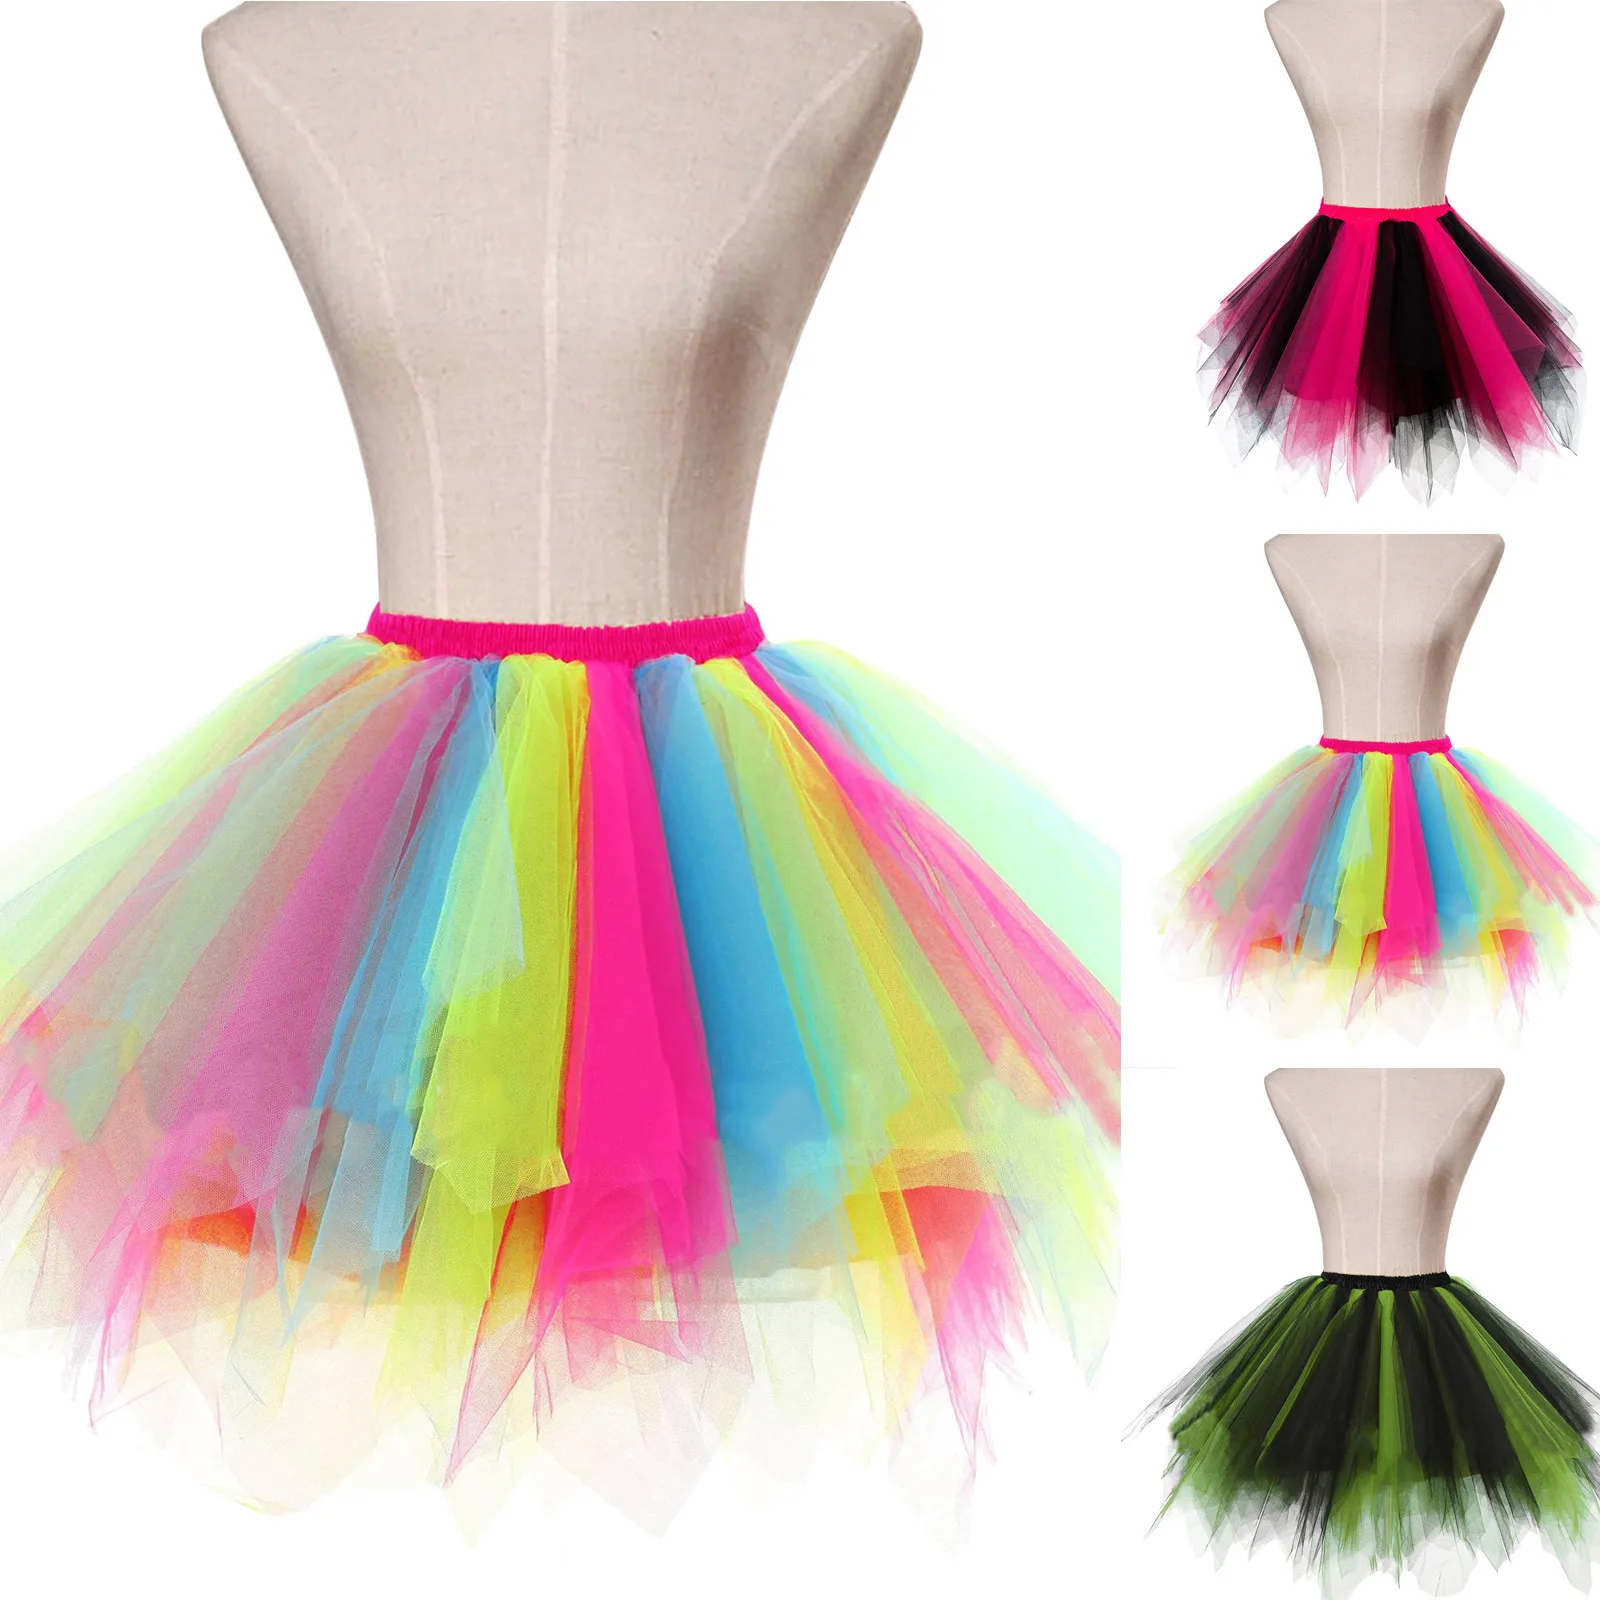 

Sexy Women Princess Ballet Half Body Skirt Colorful Carnival Outfit Mardi Gras Party Puff Skirts Girls Tulle Tutu Puffy Clothing